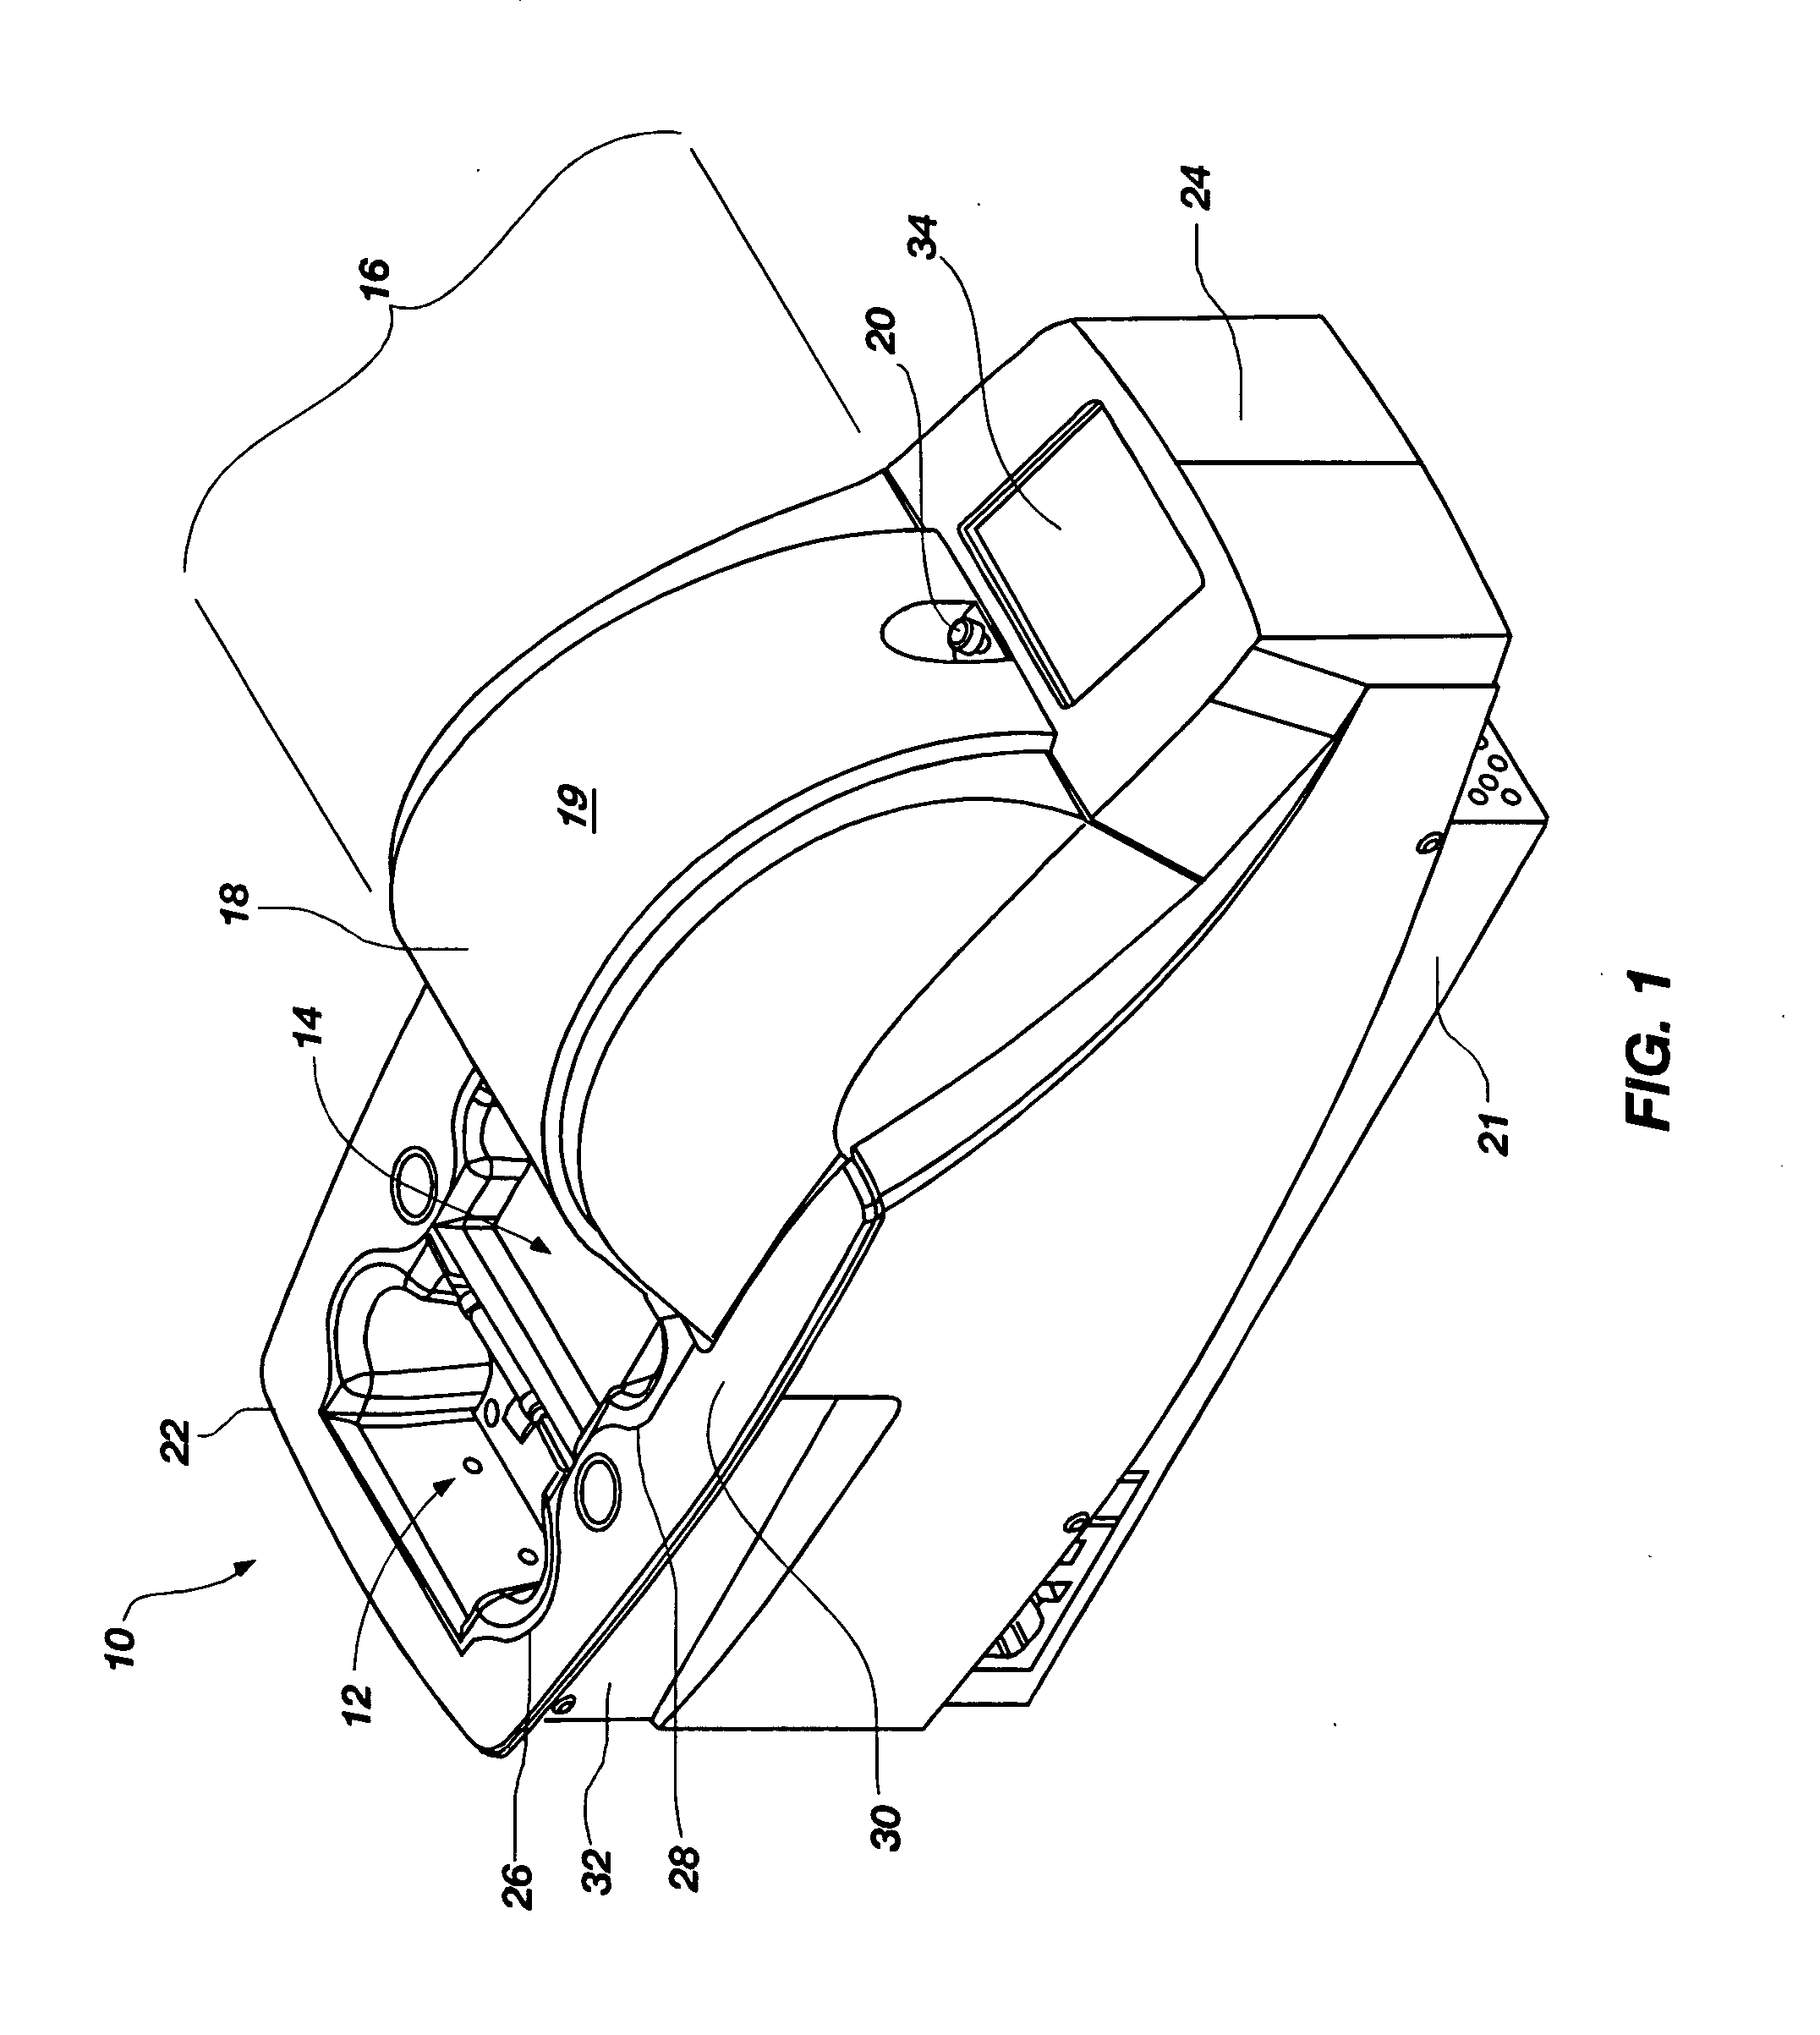 Card handling devices and methods of using the same